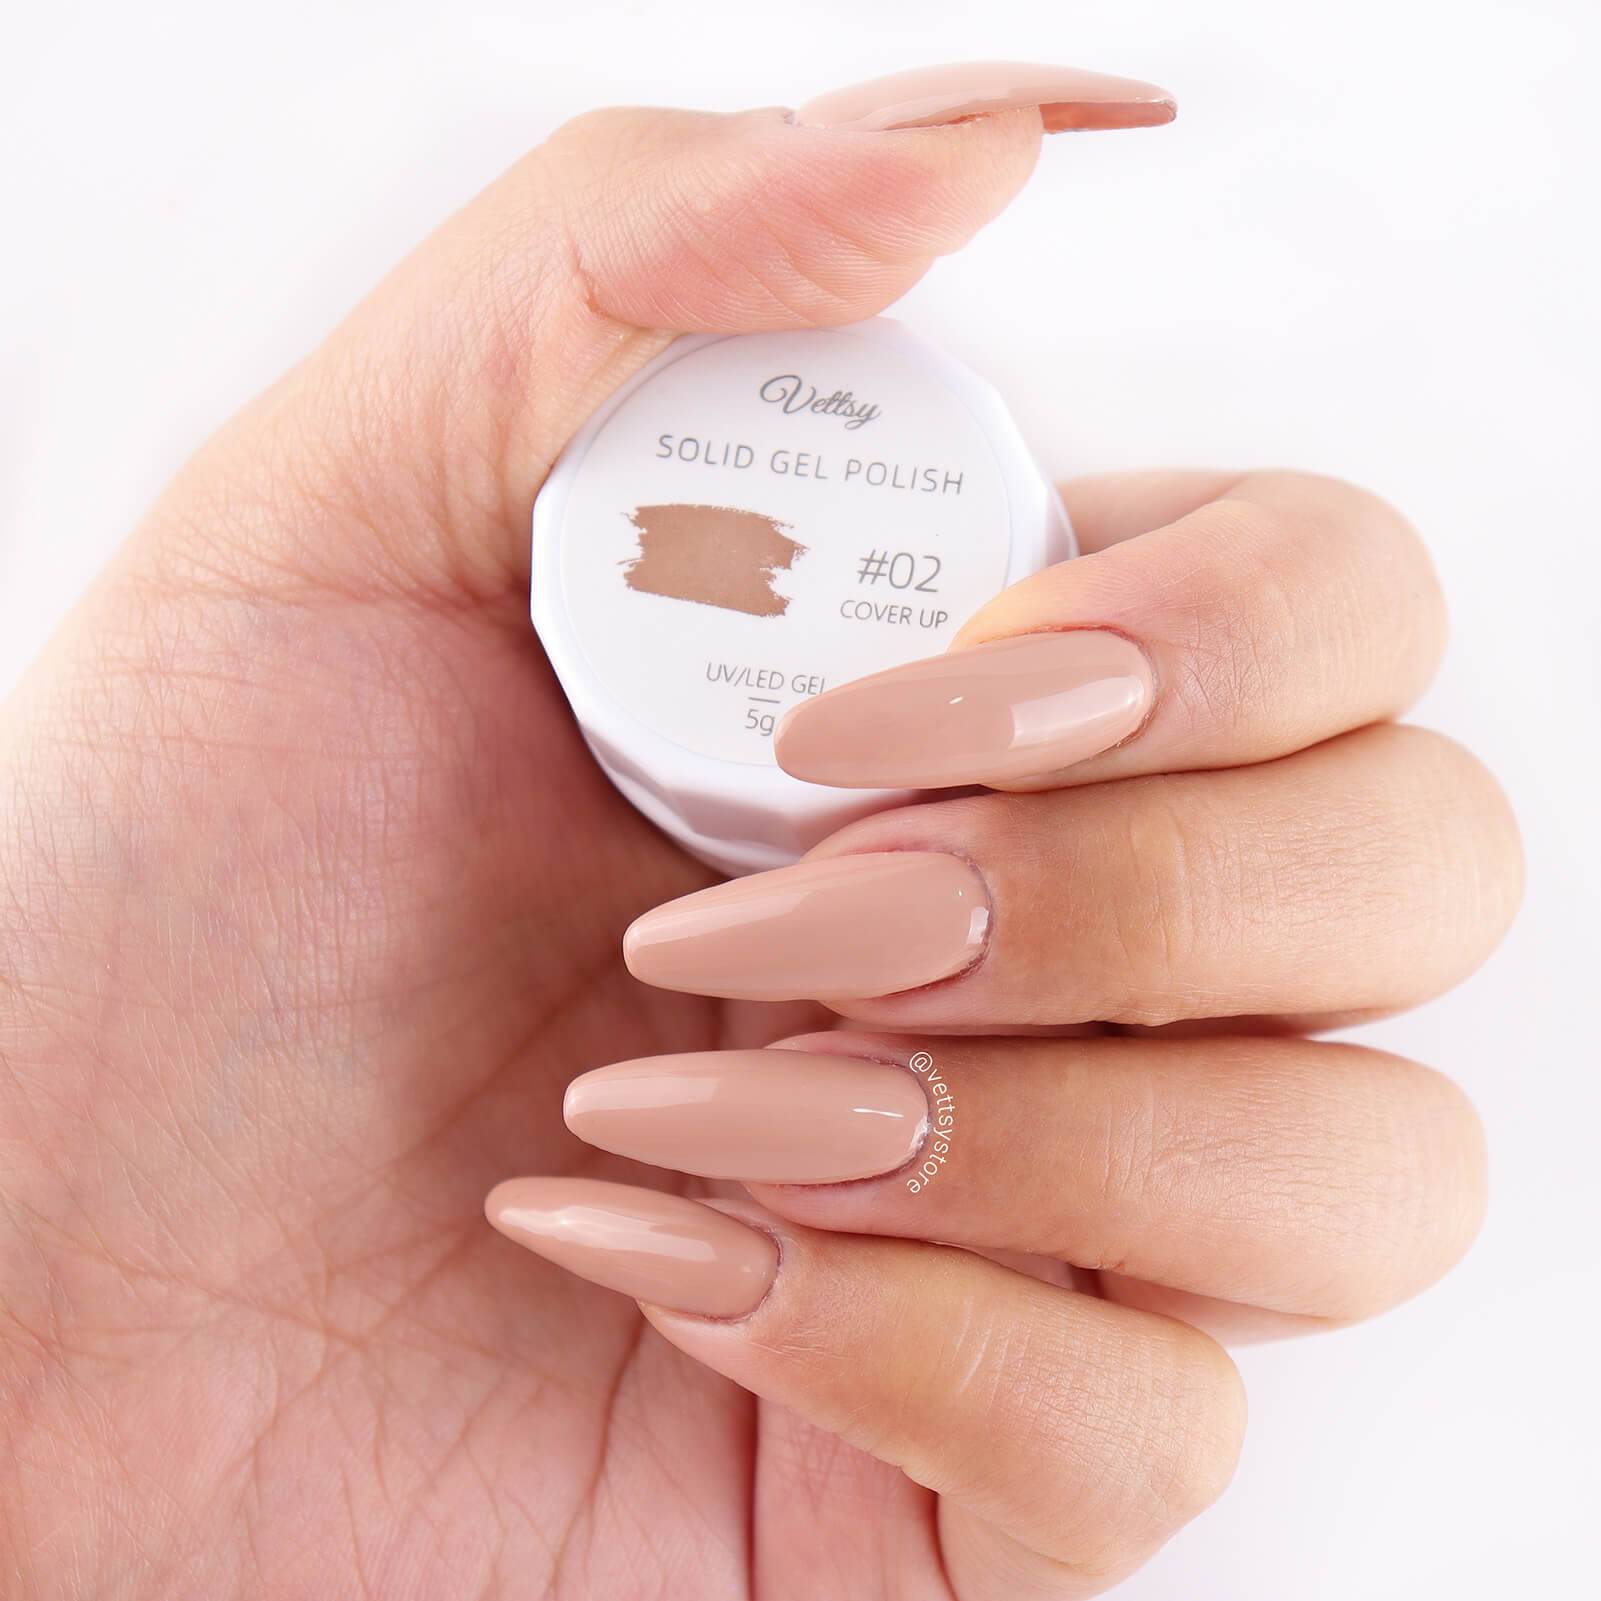 Solid Gel Polish-02 COVER UP - Vettsy